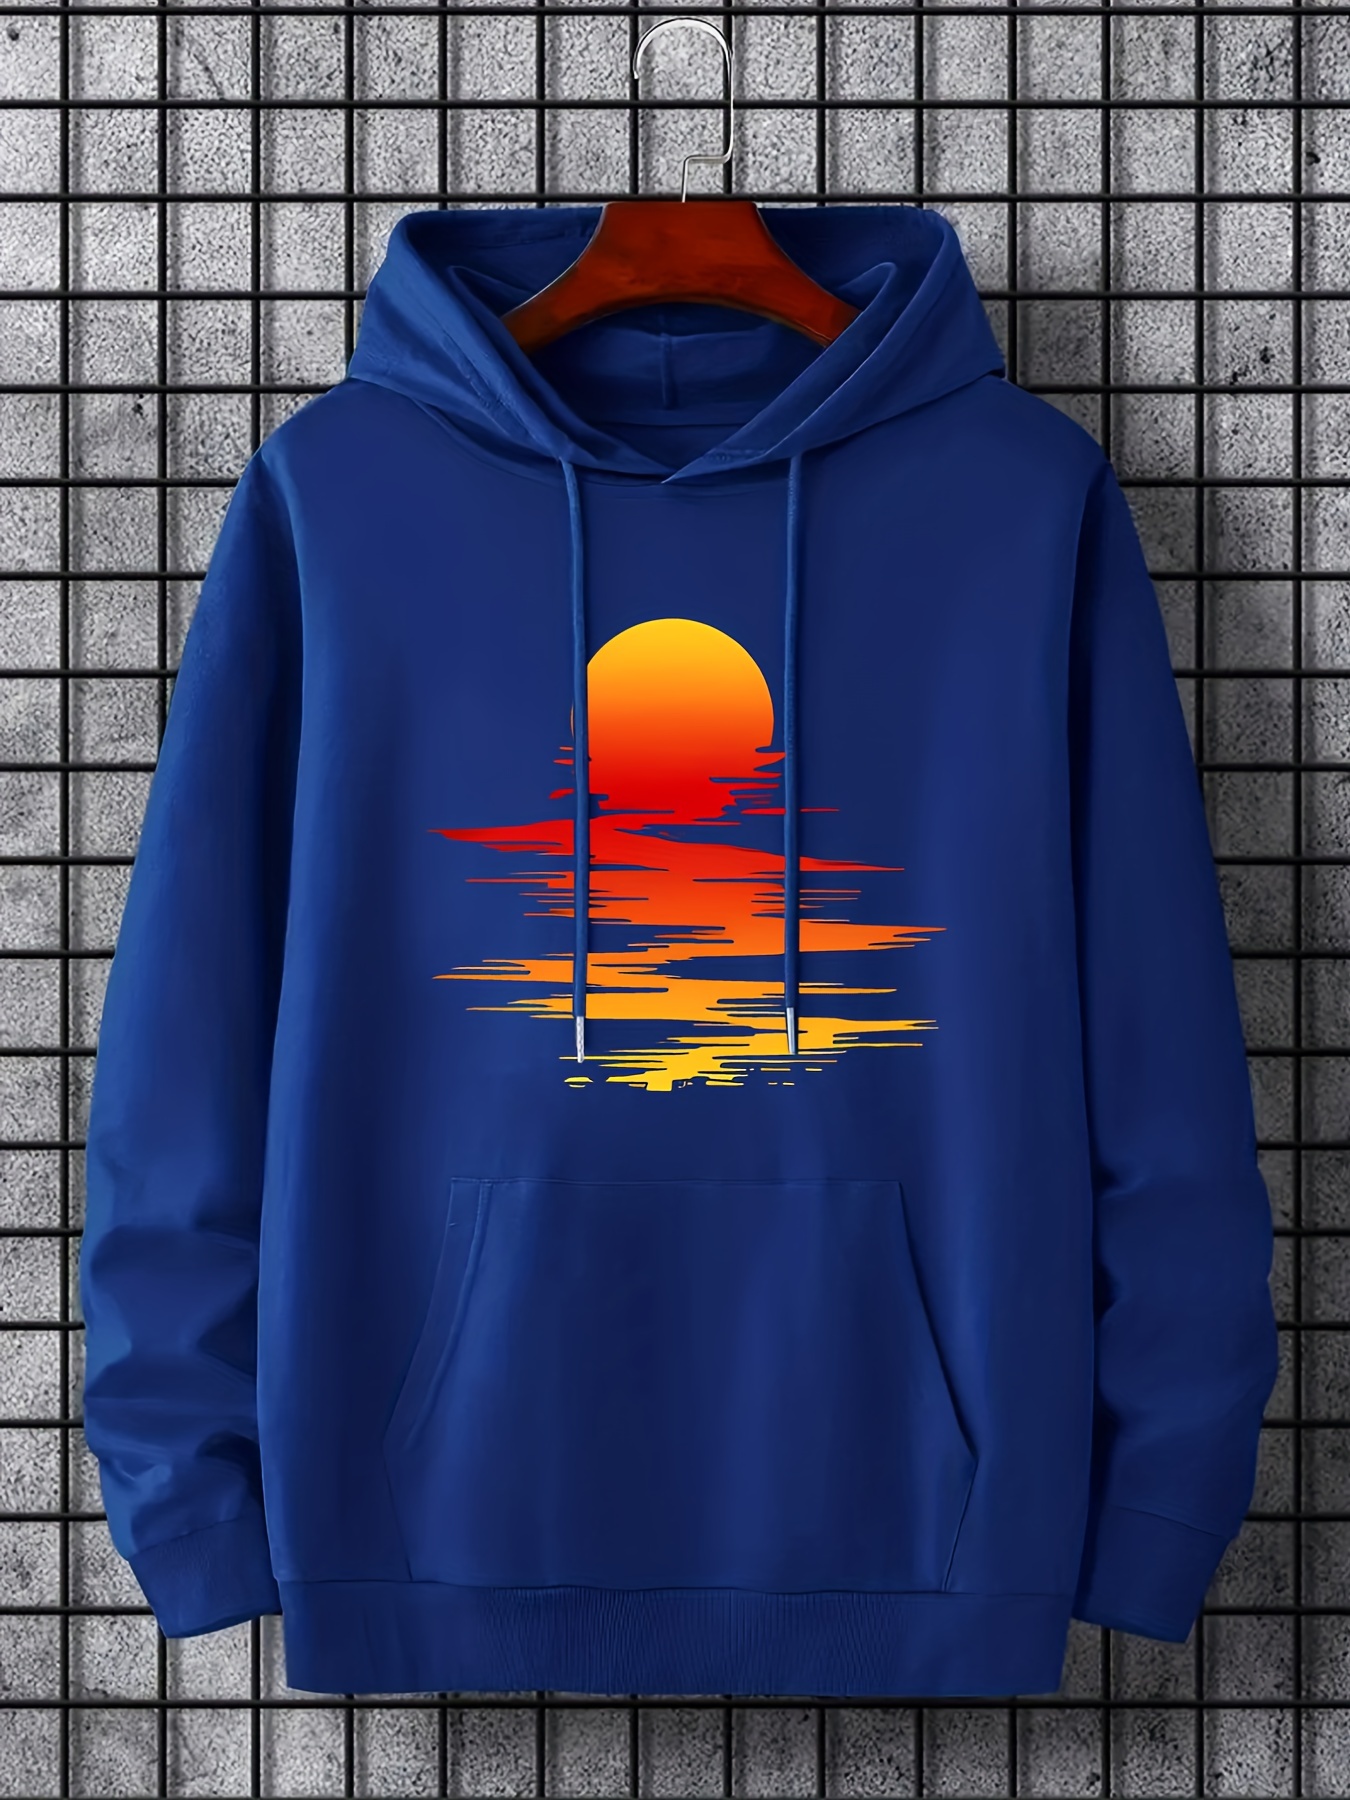 Sunset Print Hoodie, Cool Hoodies For Men, Men's Casual Graphic Design Pullover Hooded Sweatshirt With Kangaroo Pocket Streetwear For Winter Fall